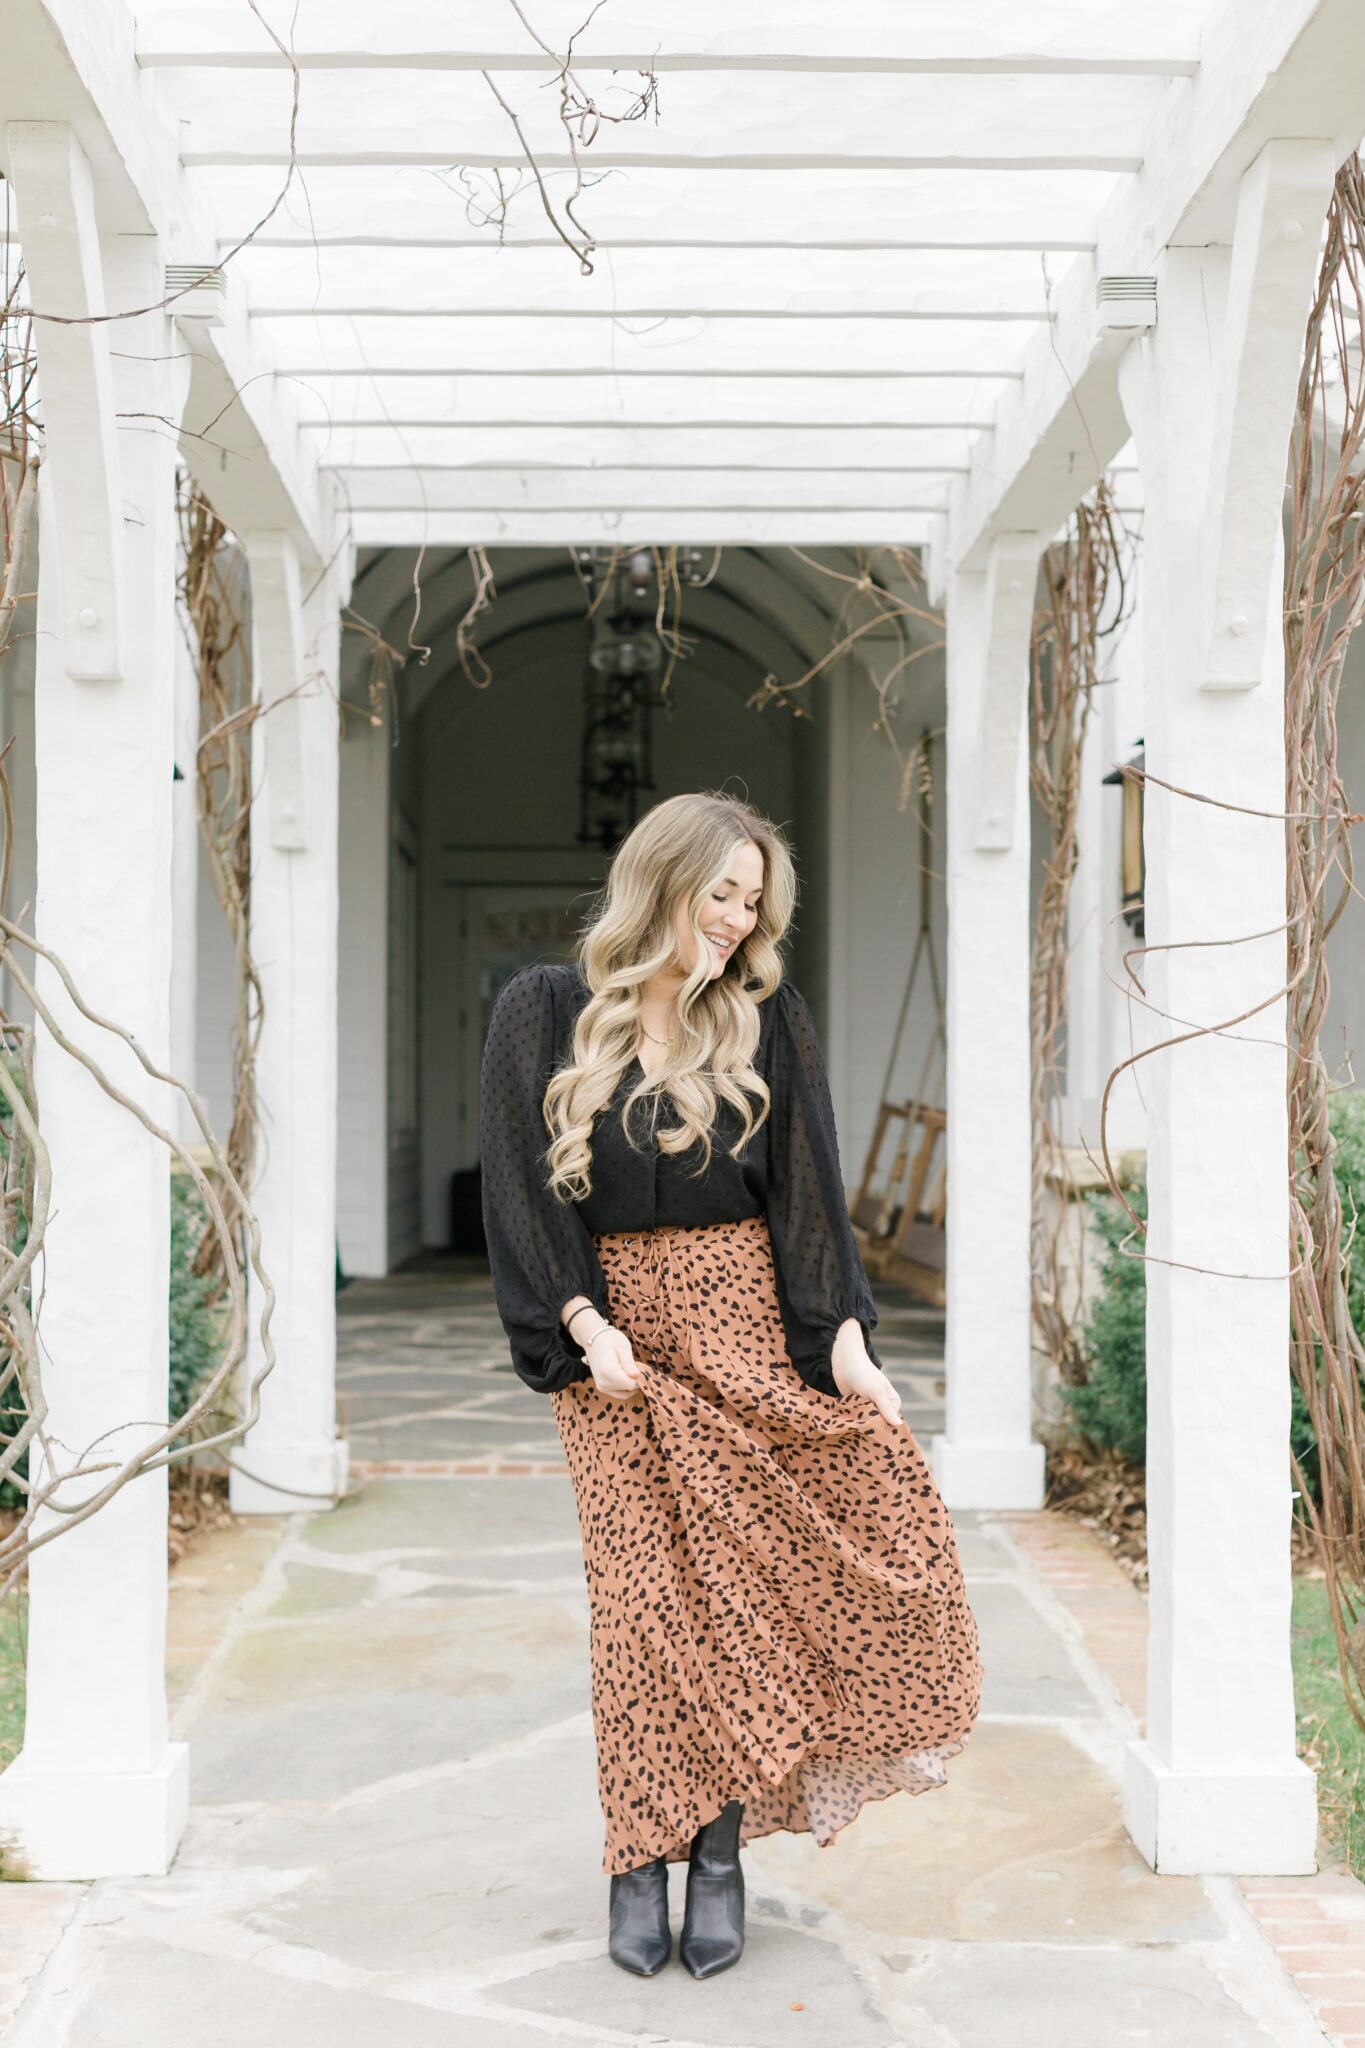 PinkBlush animal print maxi skirt styled by top Memphis fashion blogger, Walking in Memphis in High Heels.